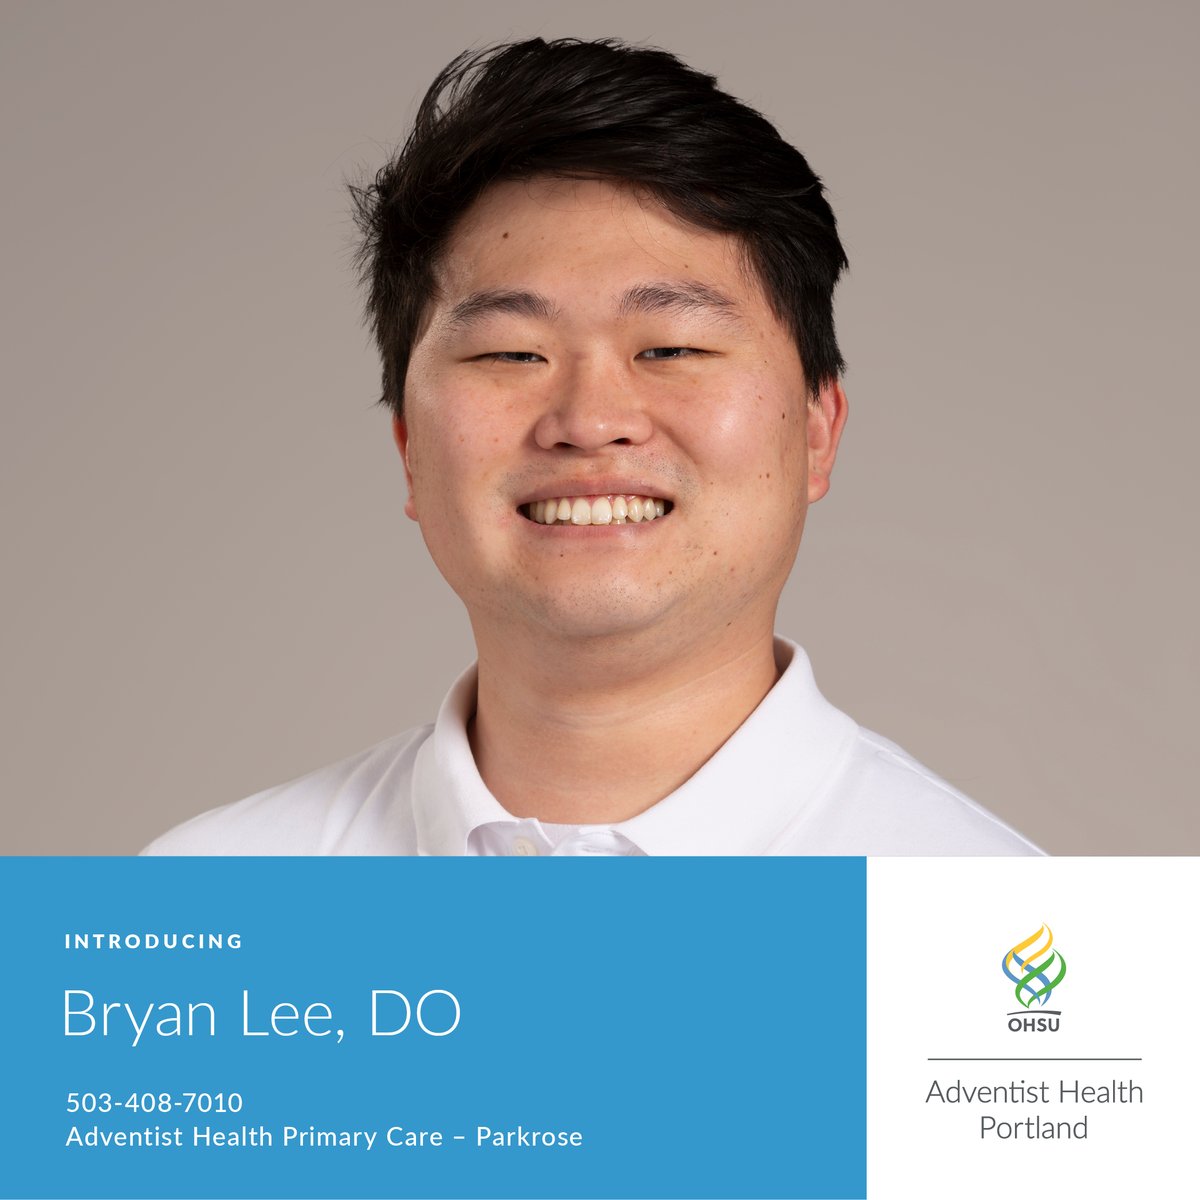 Family medicine physician Bryan Lee, DO, has a desire to help others. He says was drawn to medicine by “the pain when I saw people suffering, the desire to help those people, the confidence that I could do it and the change I have seen in people's lives.” spr.ly/6018bBhIi